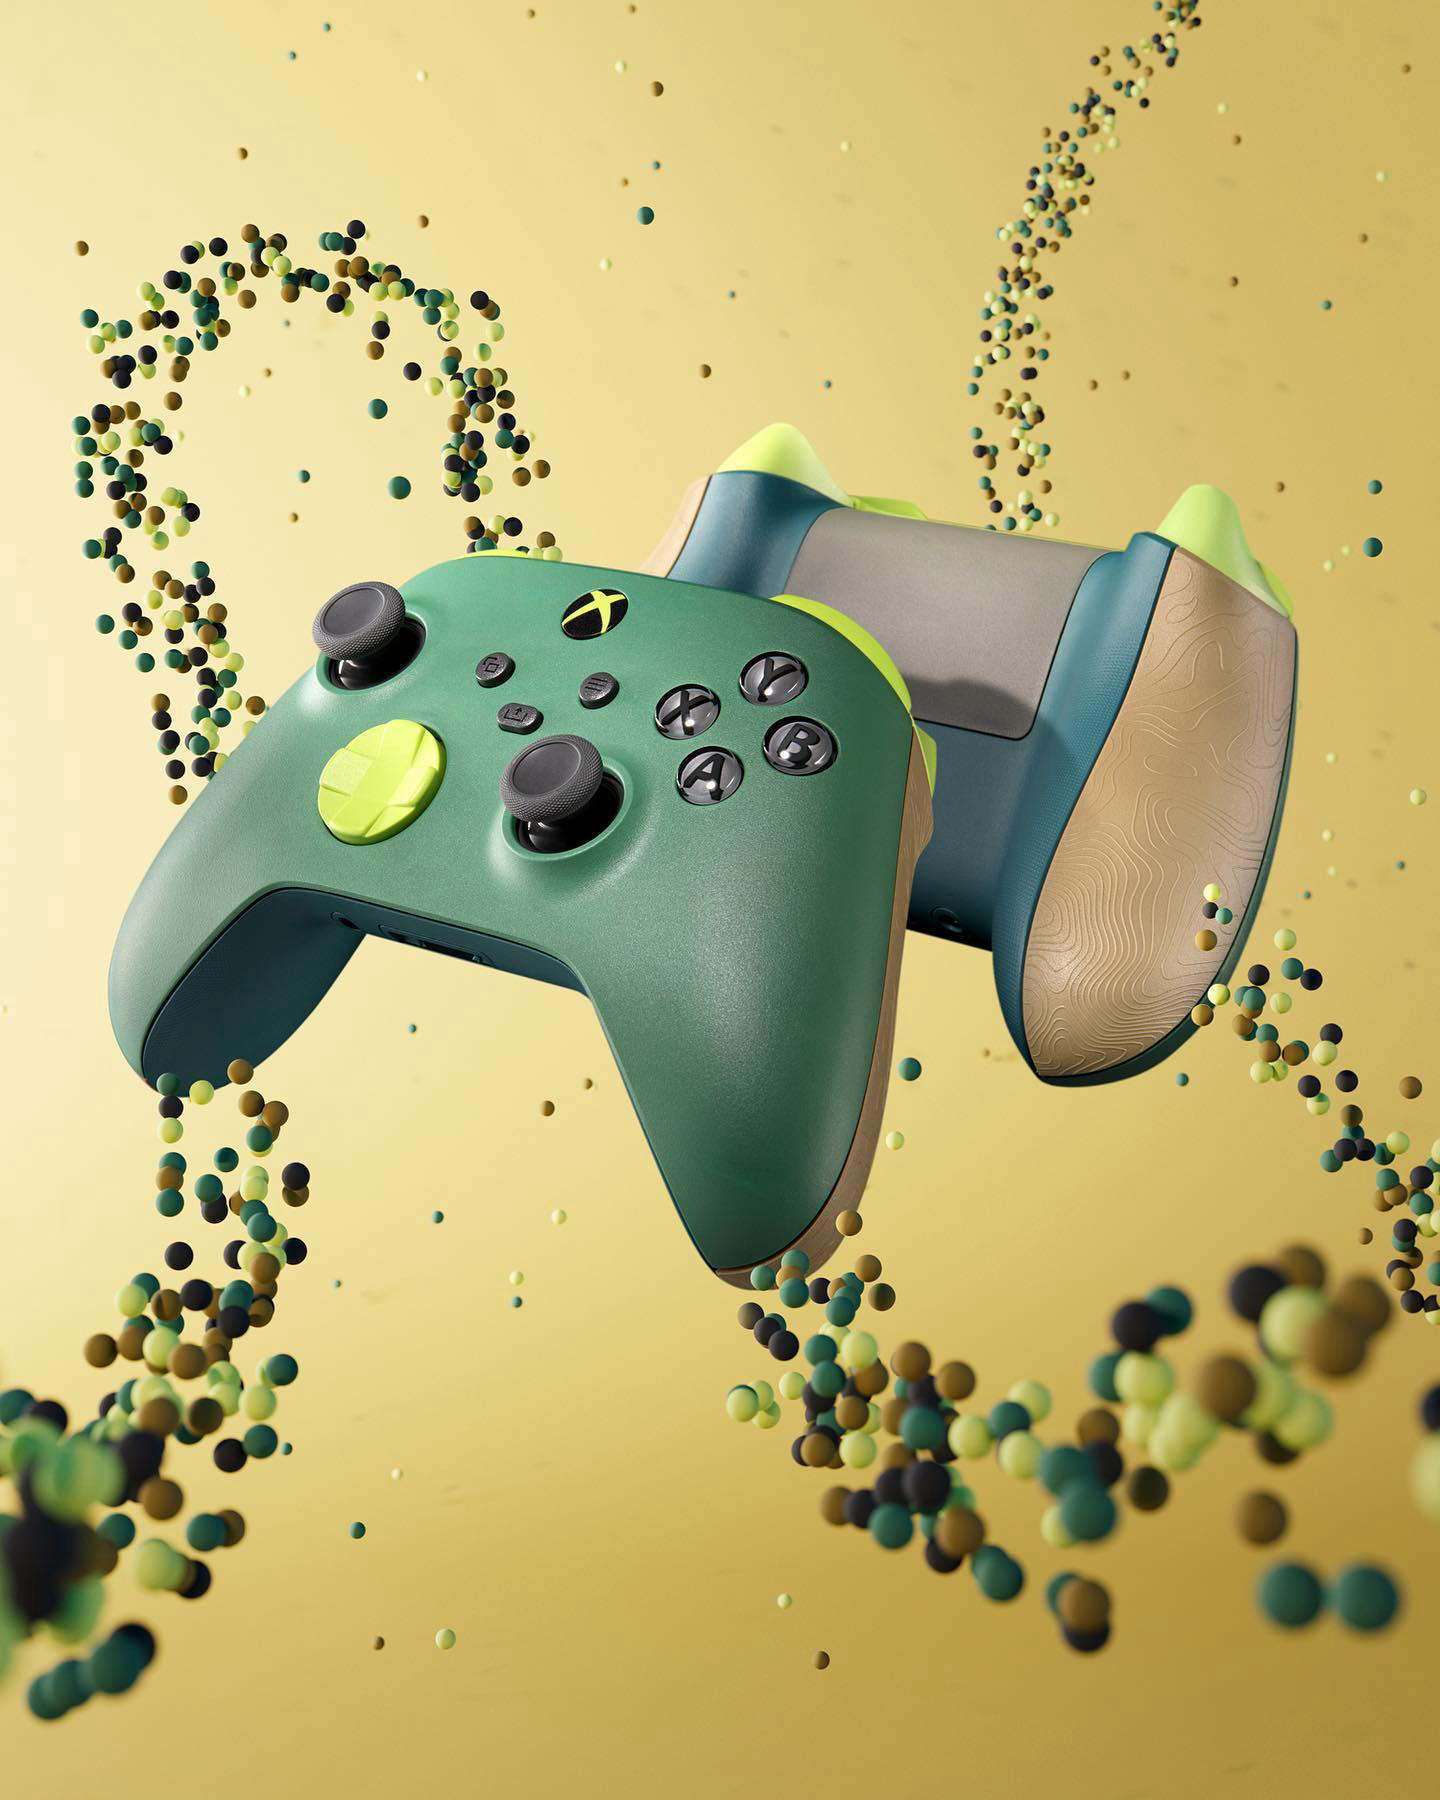 The Remix Special Edition controller is here, made from recovered plastics and ⅓ constructed from re